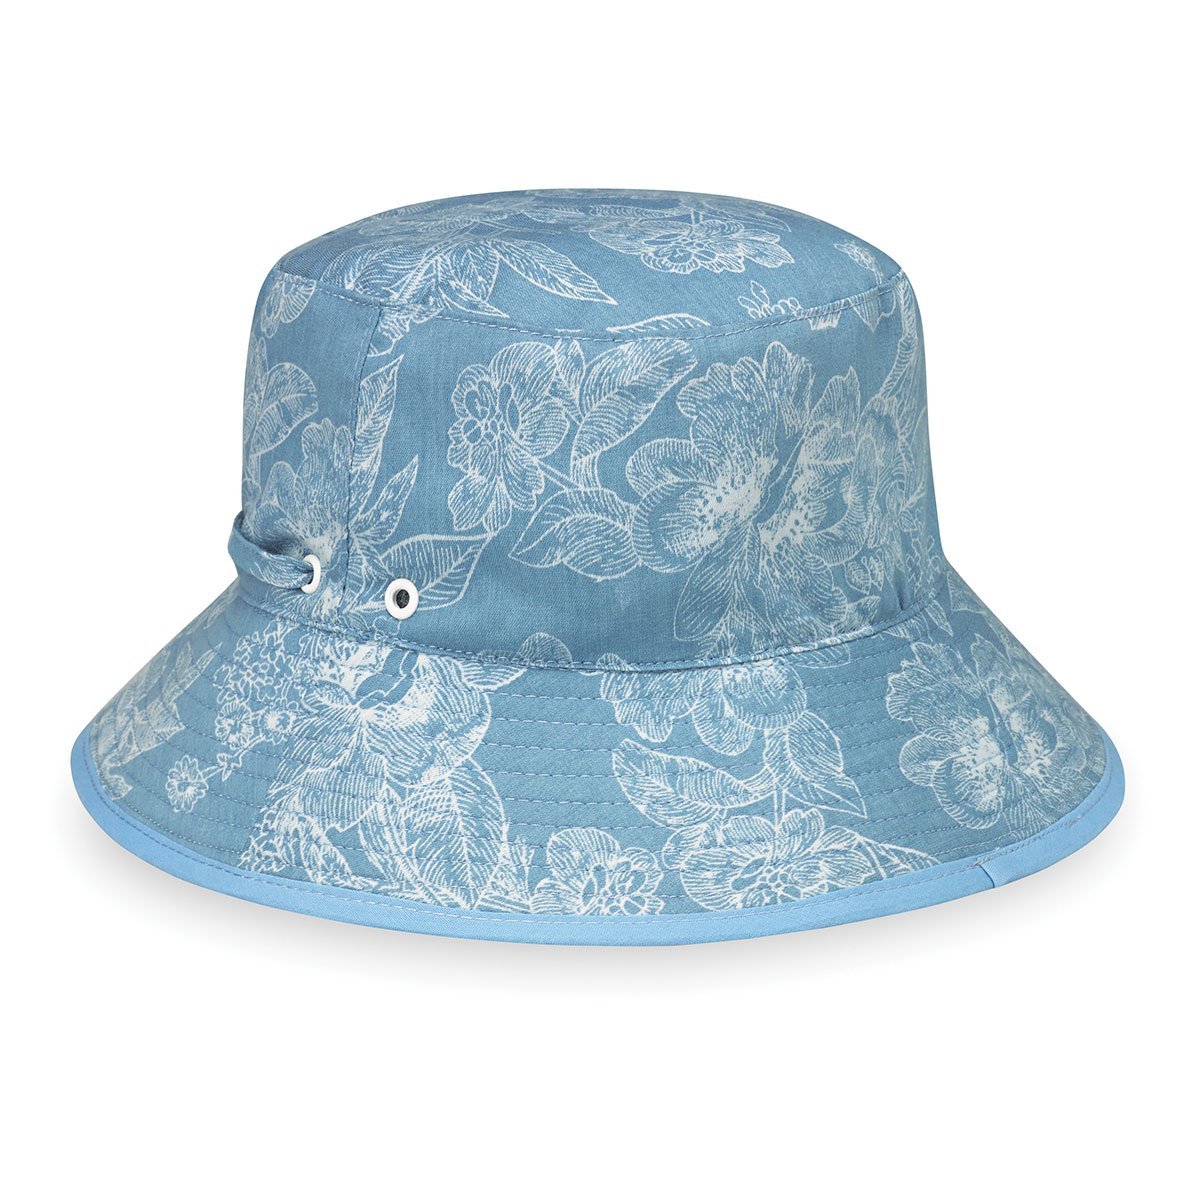 Featuring Kid's Packable Bucket Style Riley Cotton UPF Sun Hat with Chinstrap in Blue Floral from Wallaroo